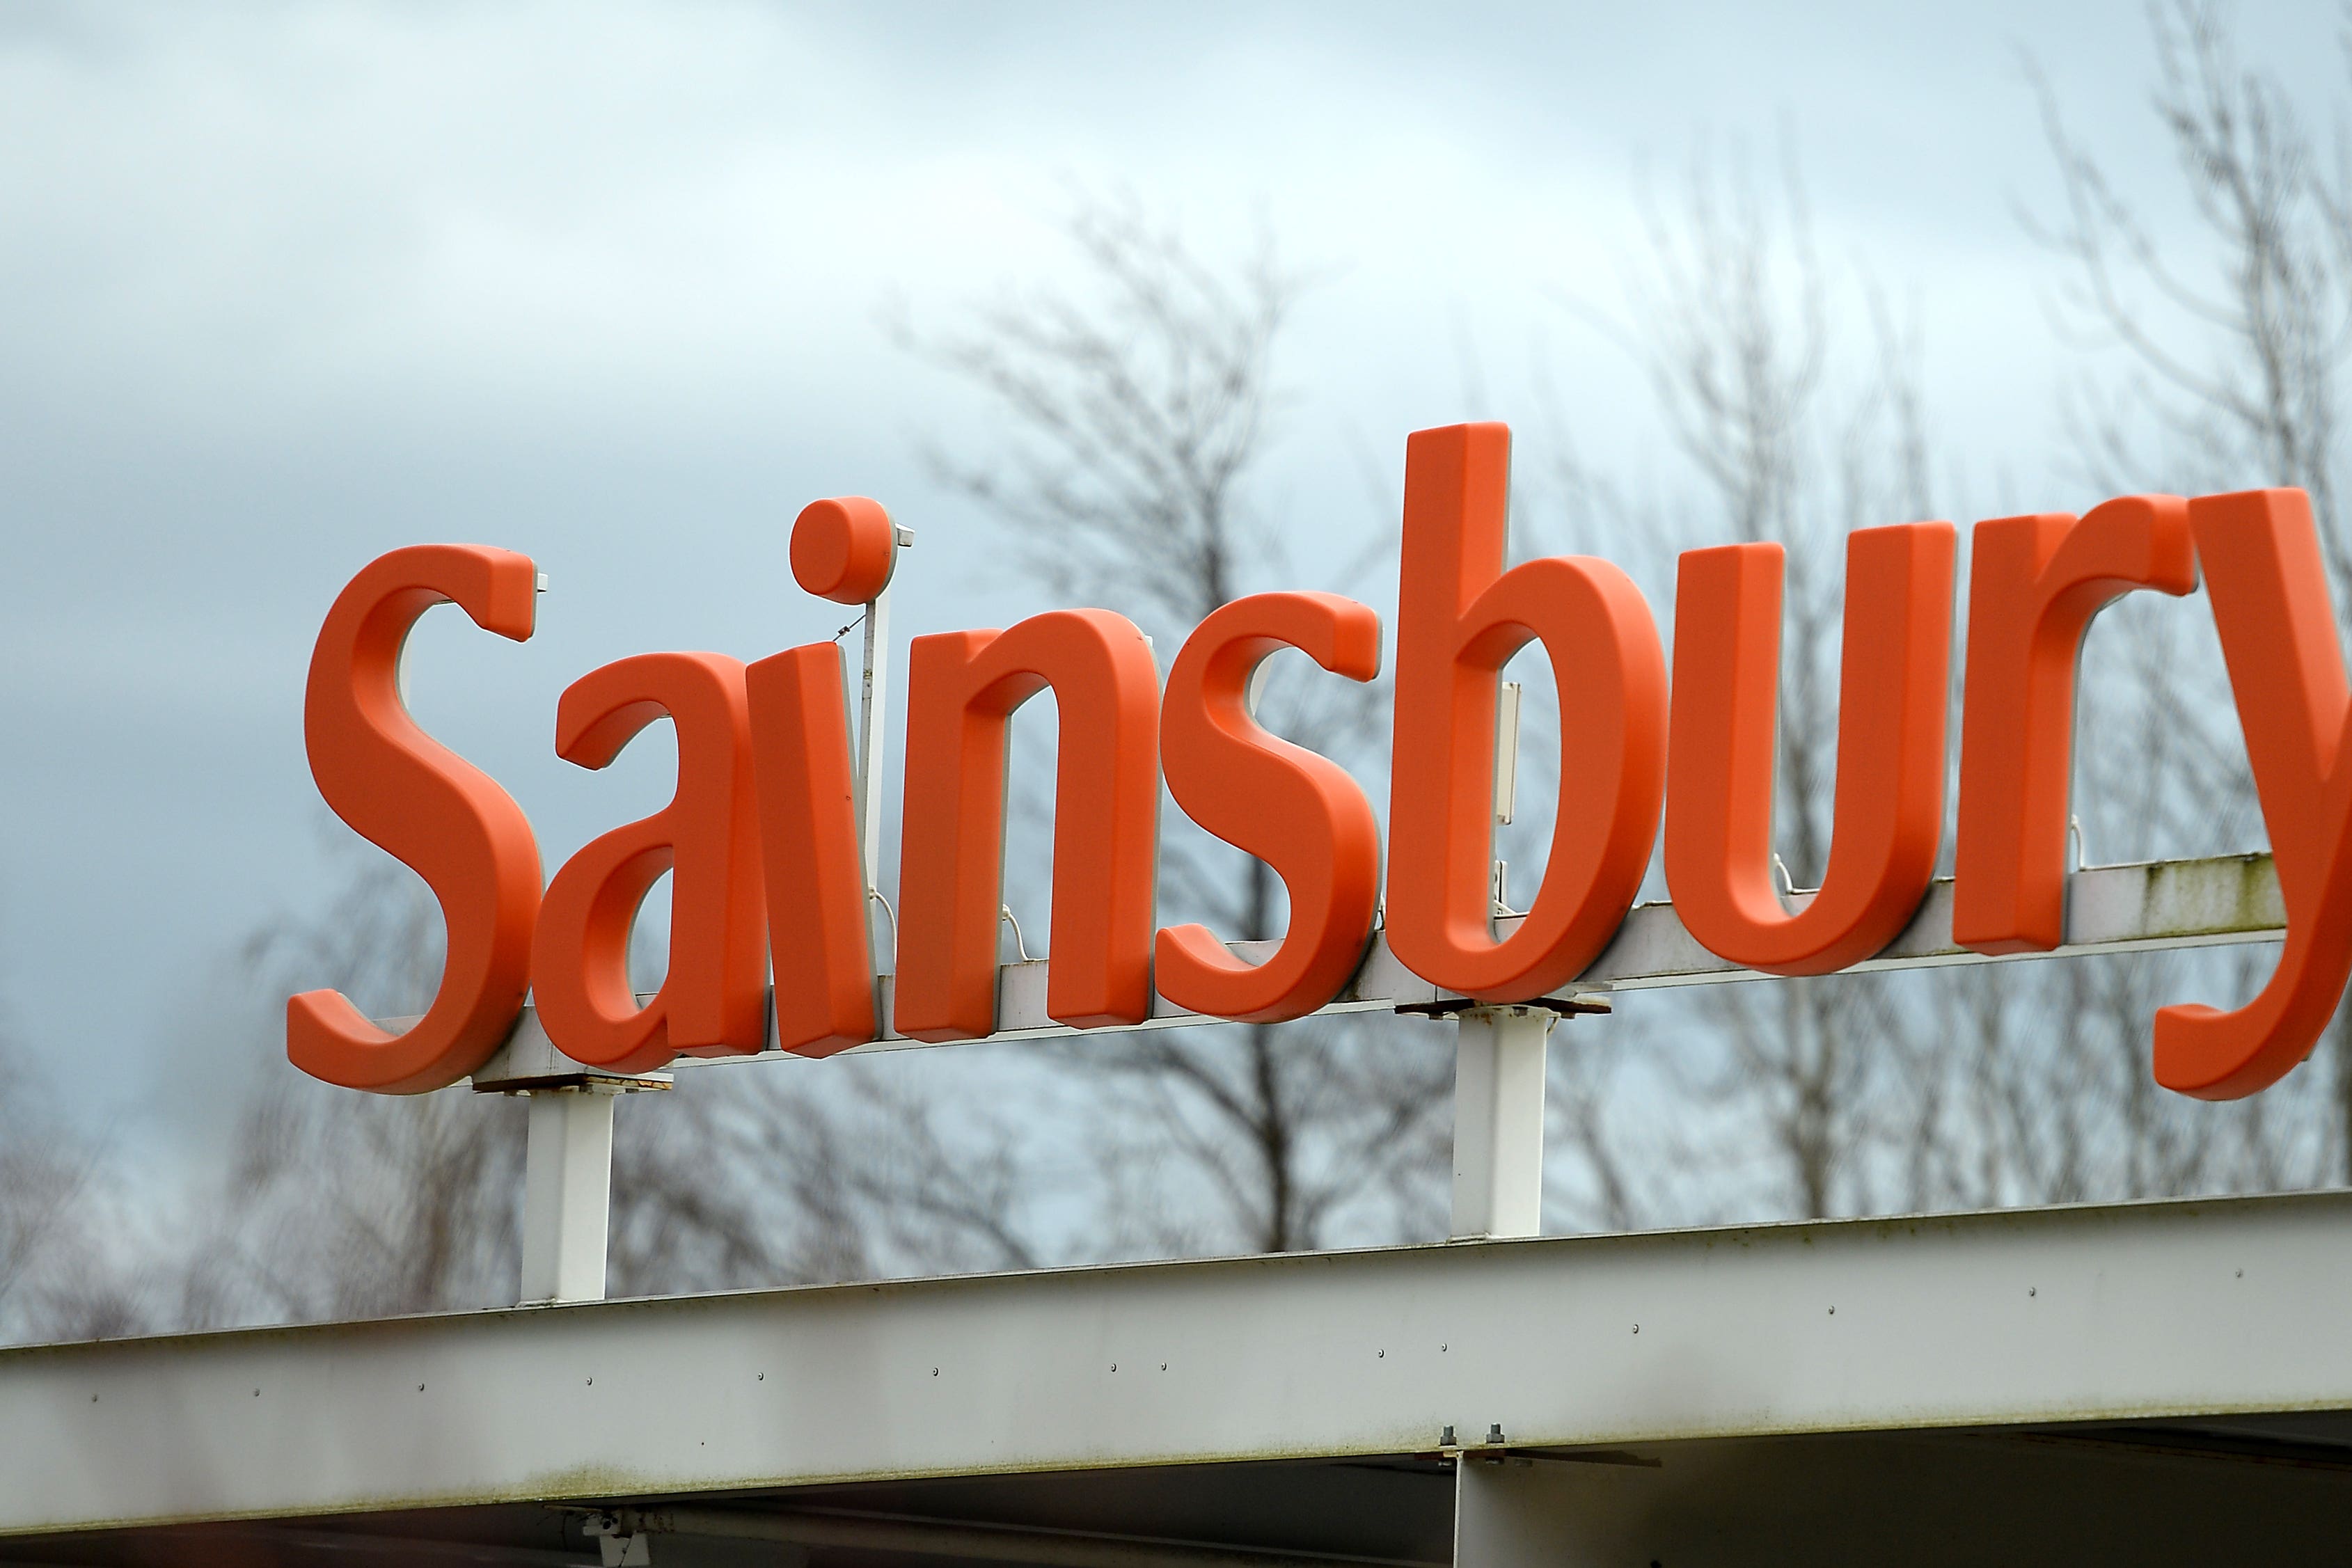 Shares in Sainsbury’s fell 6.3% on Wednesday (Andrew Matthews/PA)